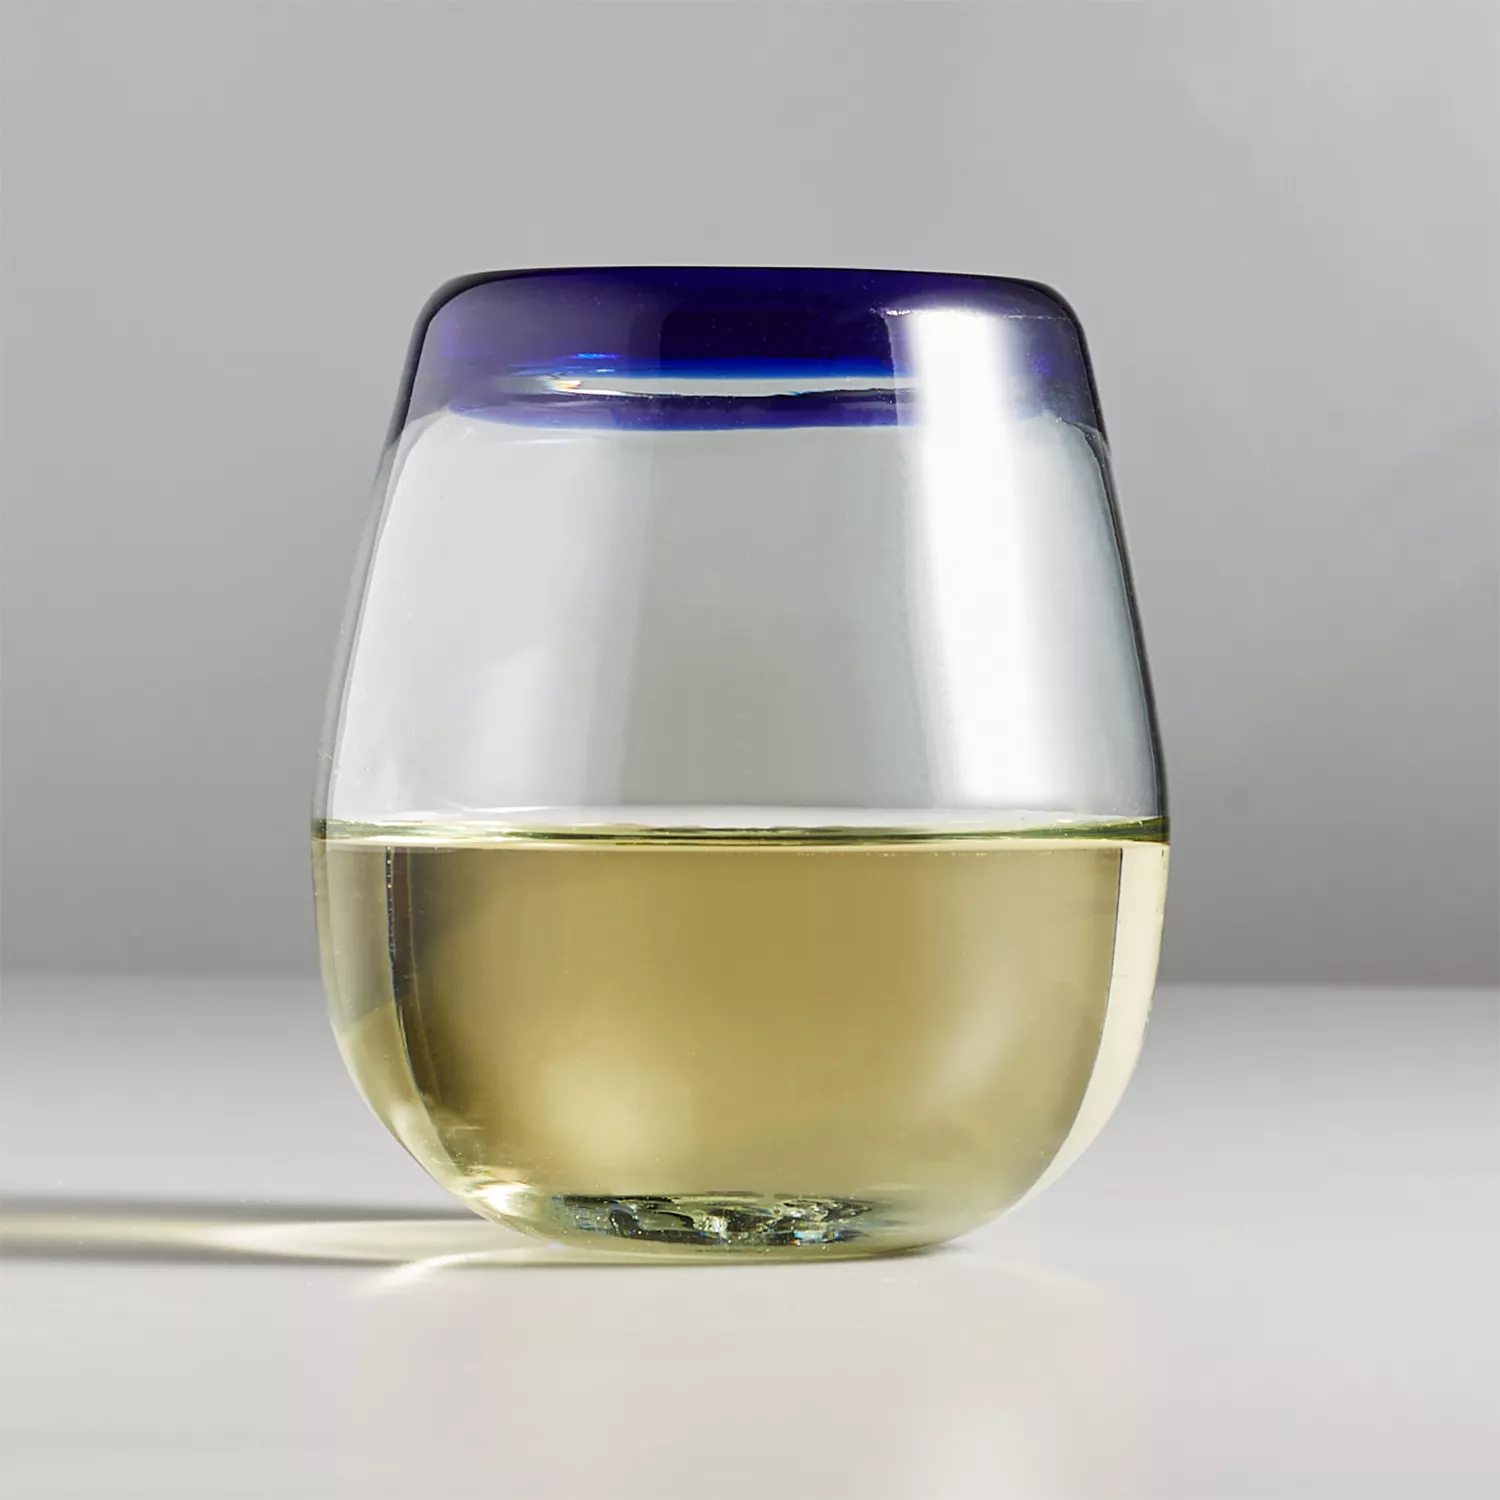 Recycled Stemless Wine Glass